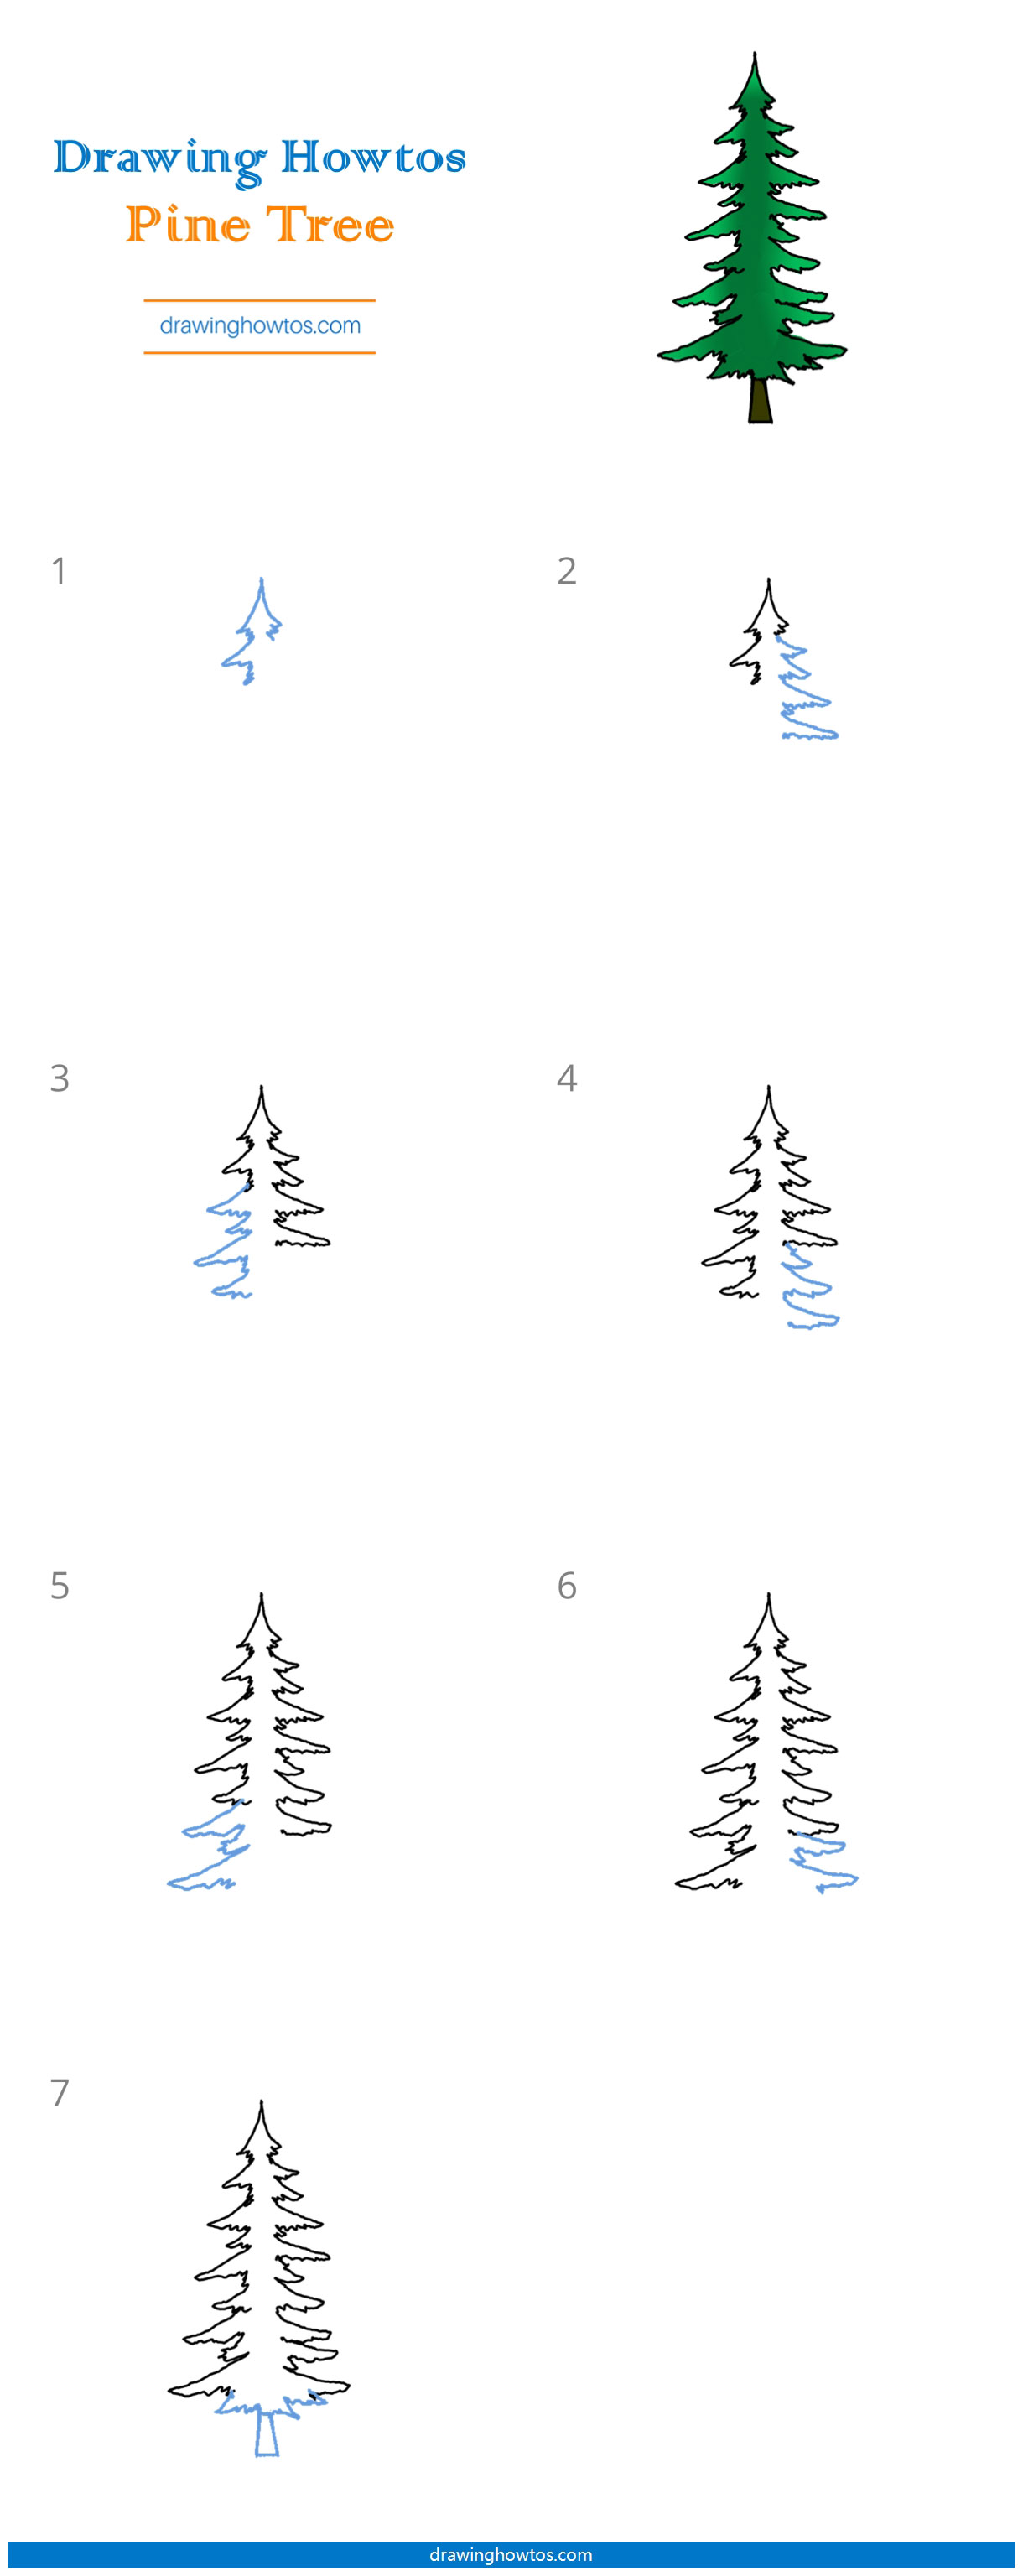 How to Draw a Pine Tree Step by Step